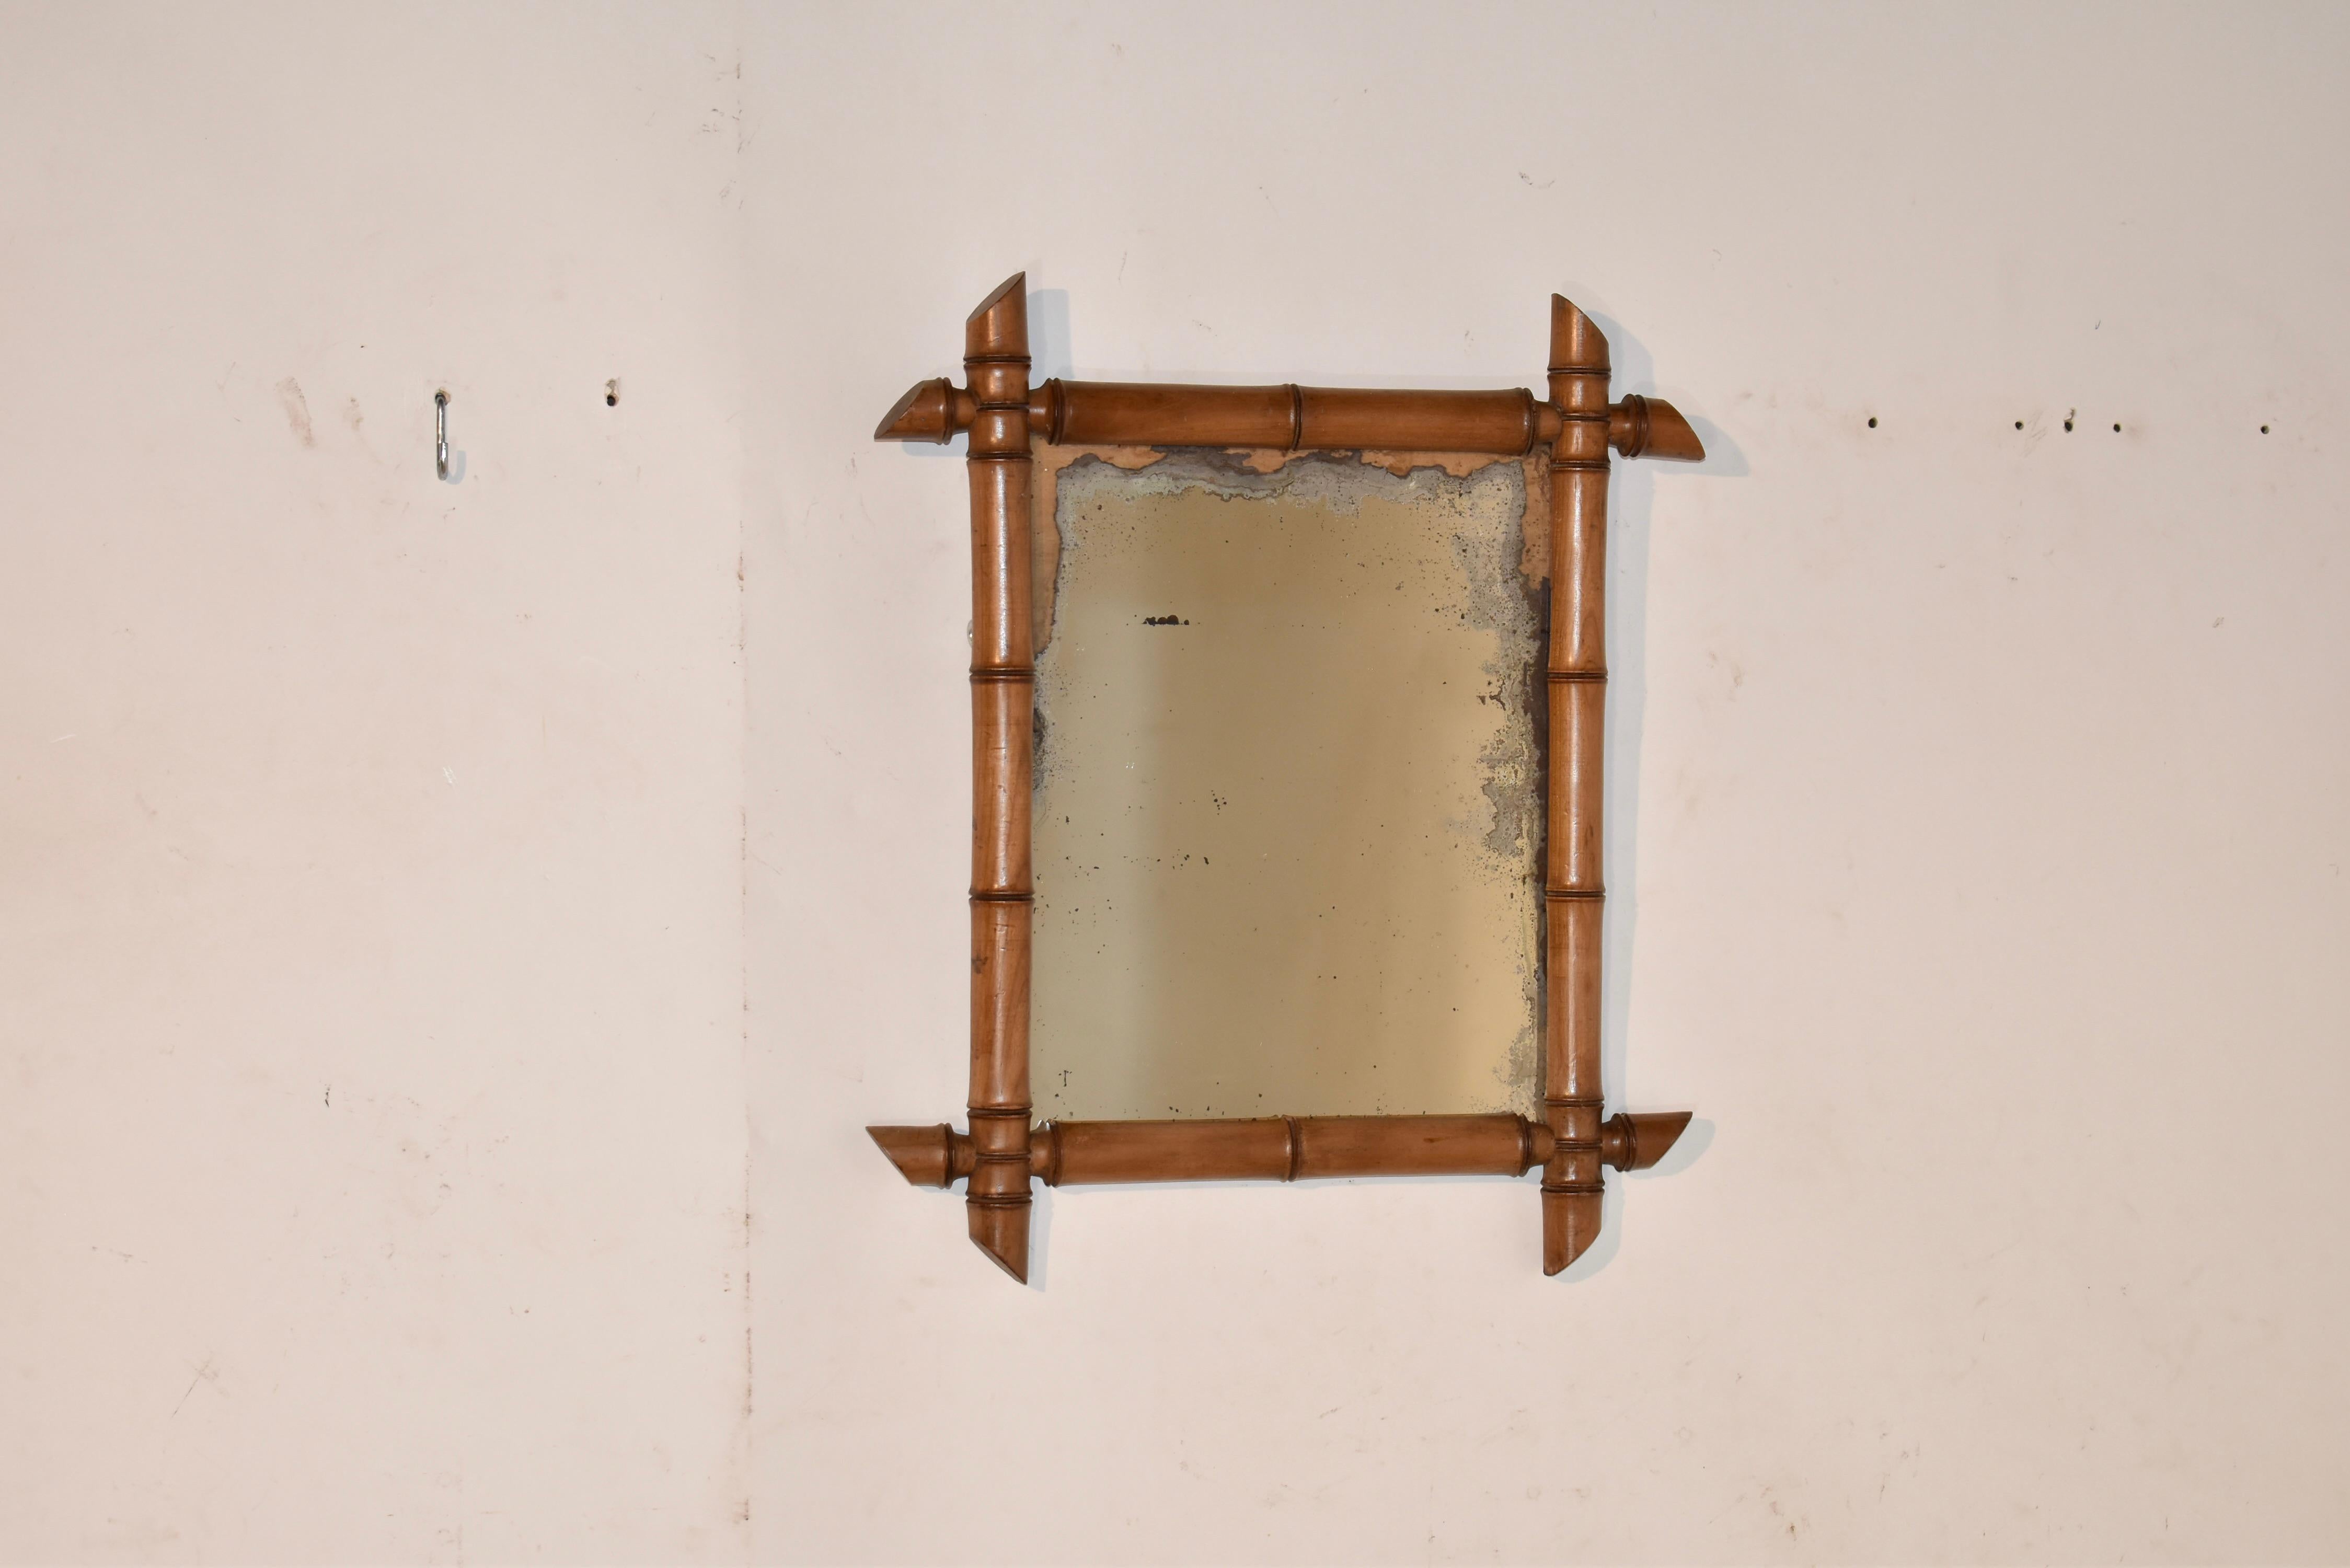 French wall mirror in the faux bamboo style.  the mirror frame is hand turned to have the appearance of faux bamboo, and it surrounds what appears to be the original mirror, which is missing a lot of its mercury finish.  This mirror has so much